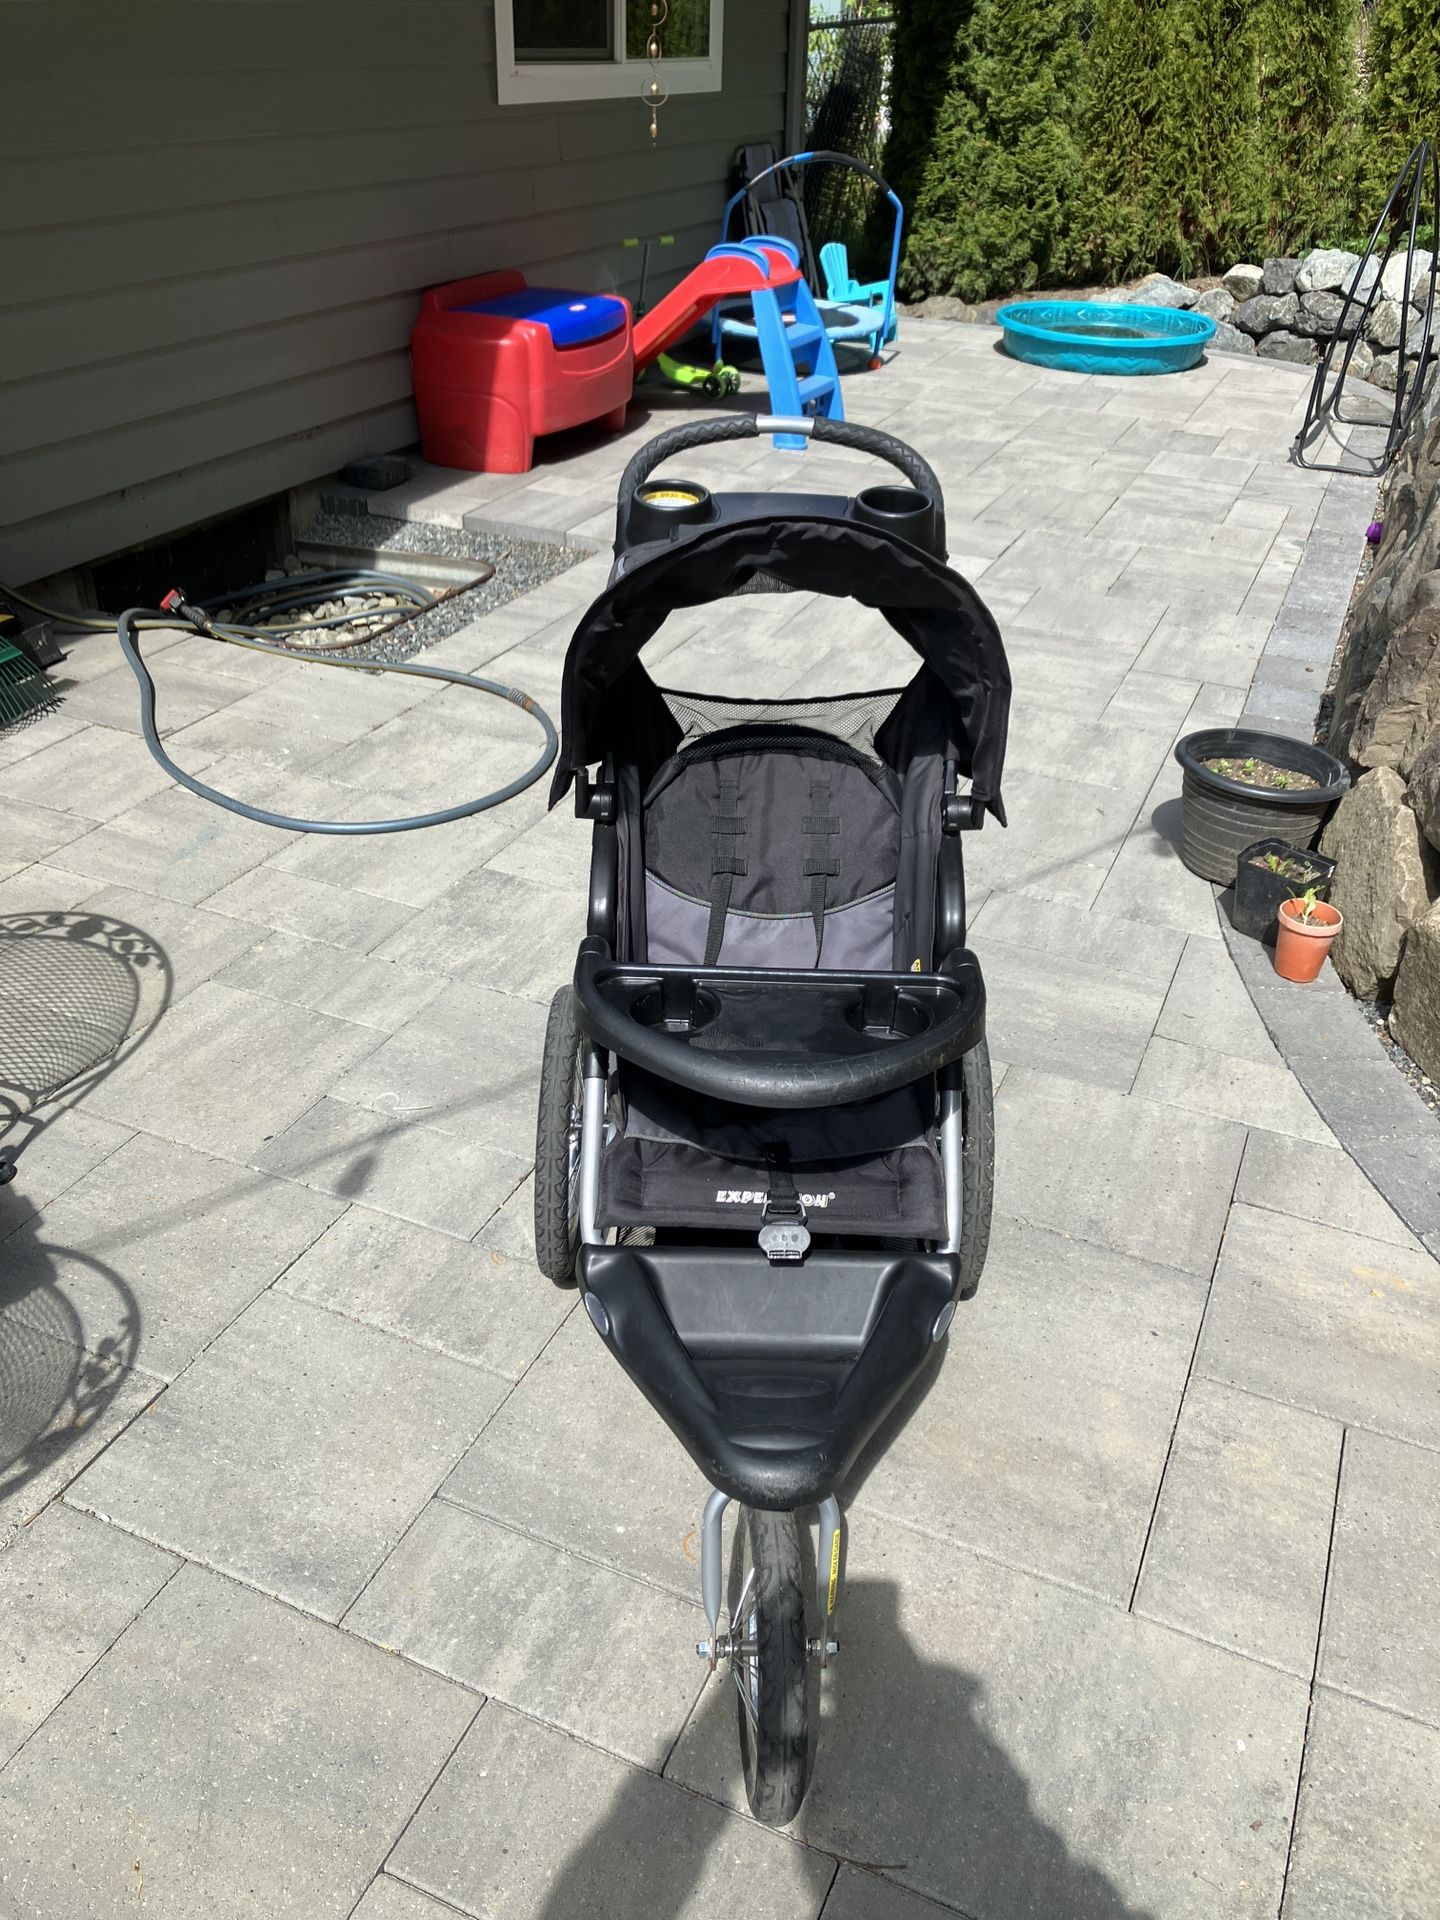 Baby Stroller and Car Seat 